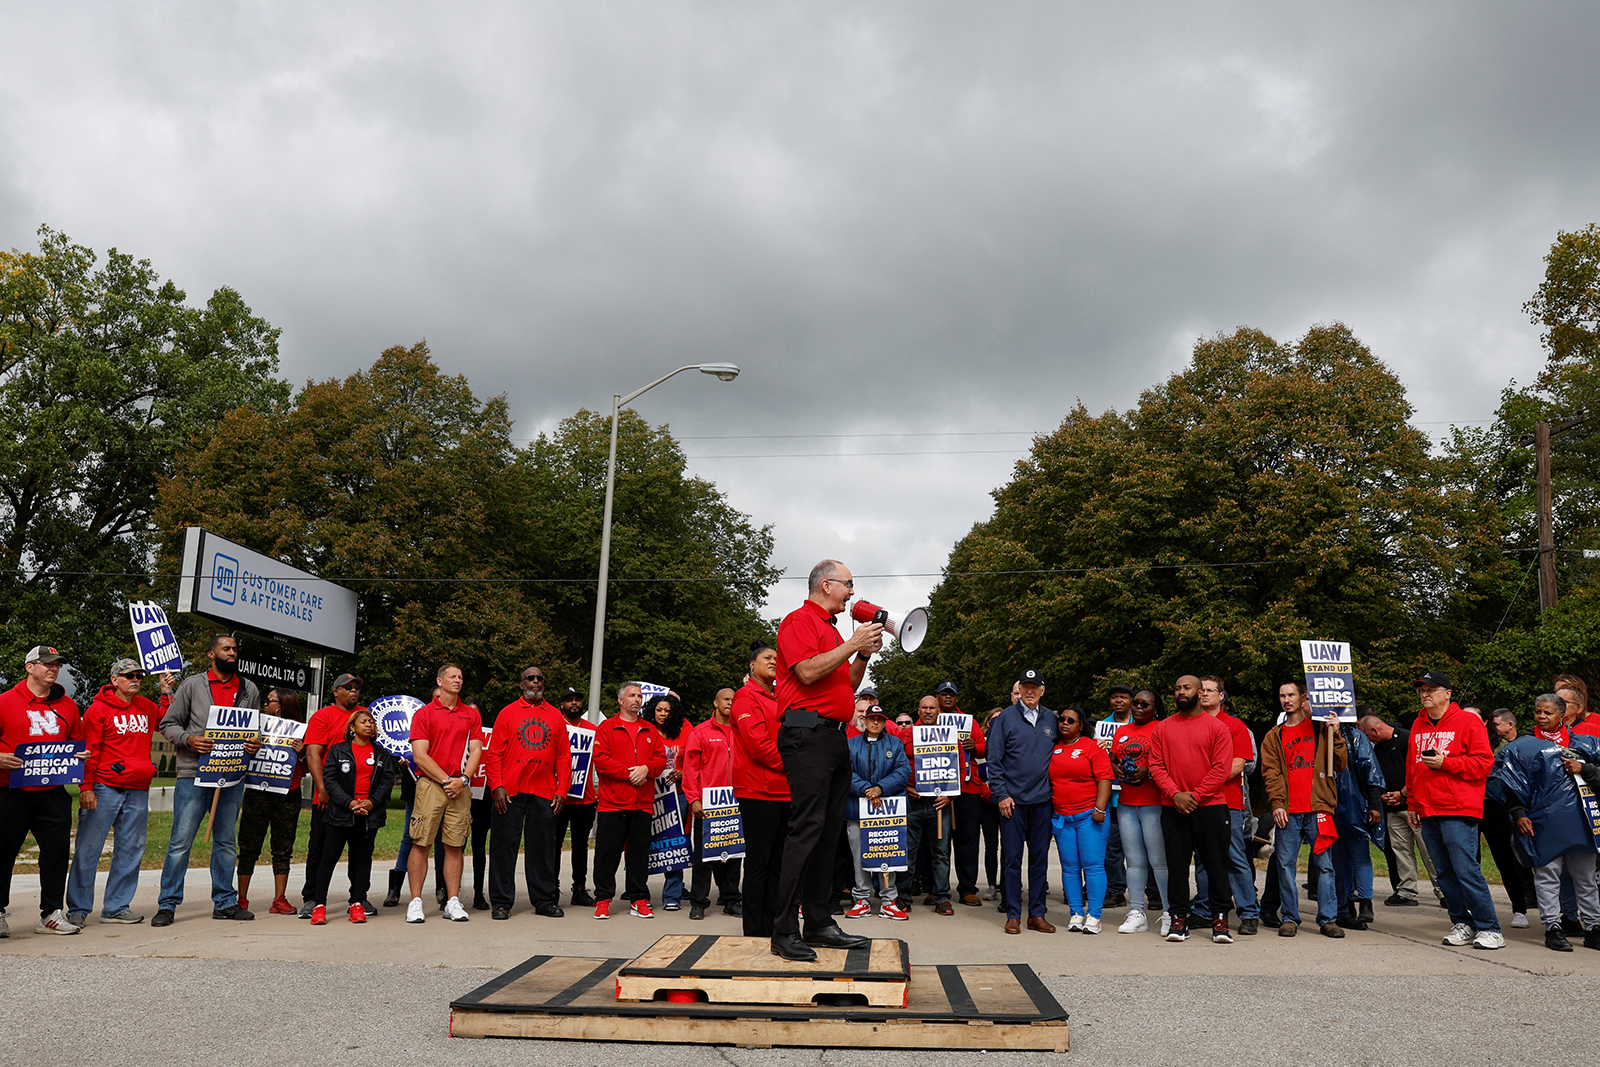 Shawn Fain, President of the United Auto Workers (UAW) speaks as U.S. President Joe Biden joins striking members of the United Auto Workers (UAW) on the picket line outside the GM's Willow Run Distribution Center, in Bellville, Wayne County, Michigan, today.